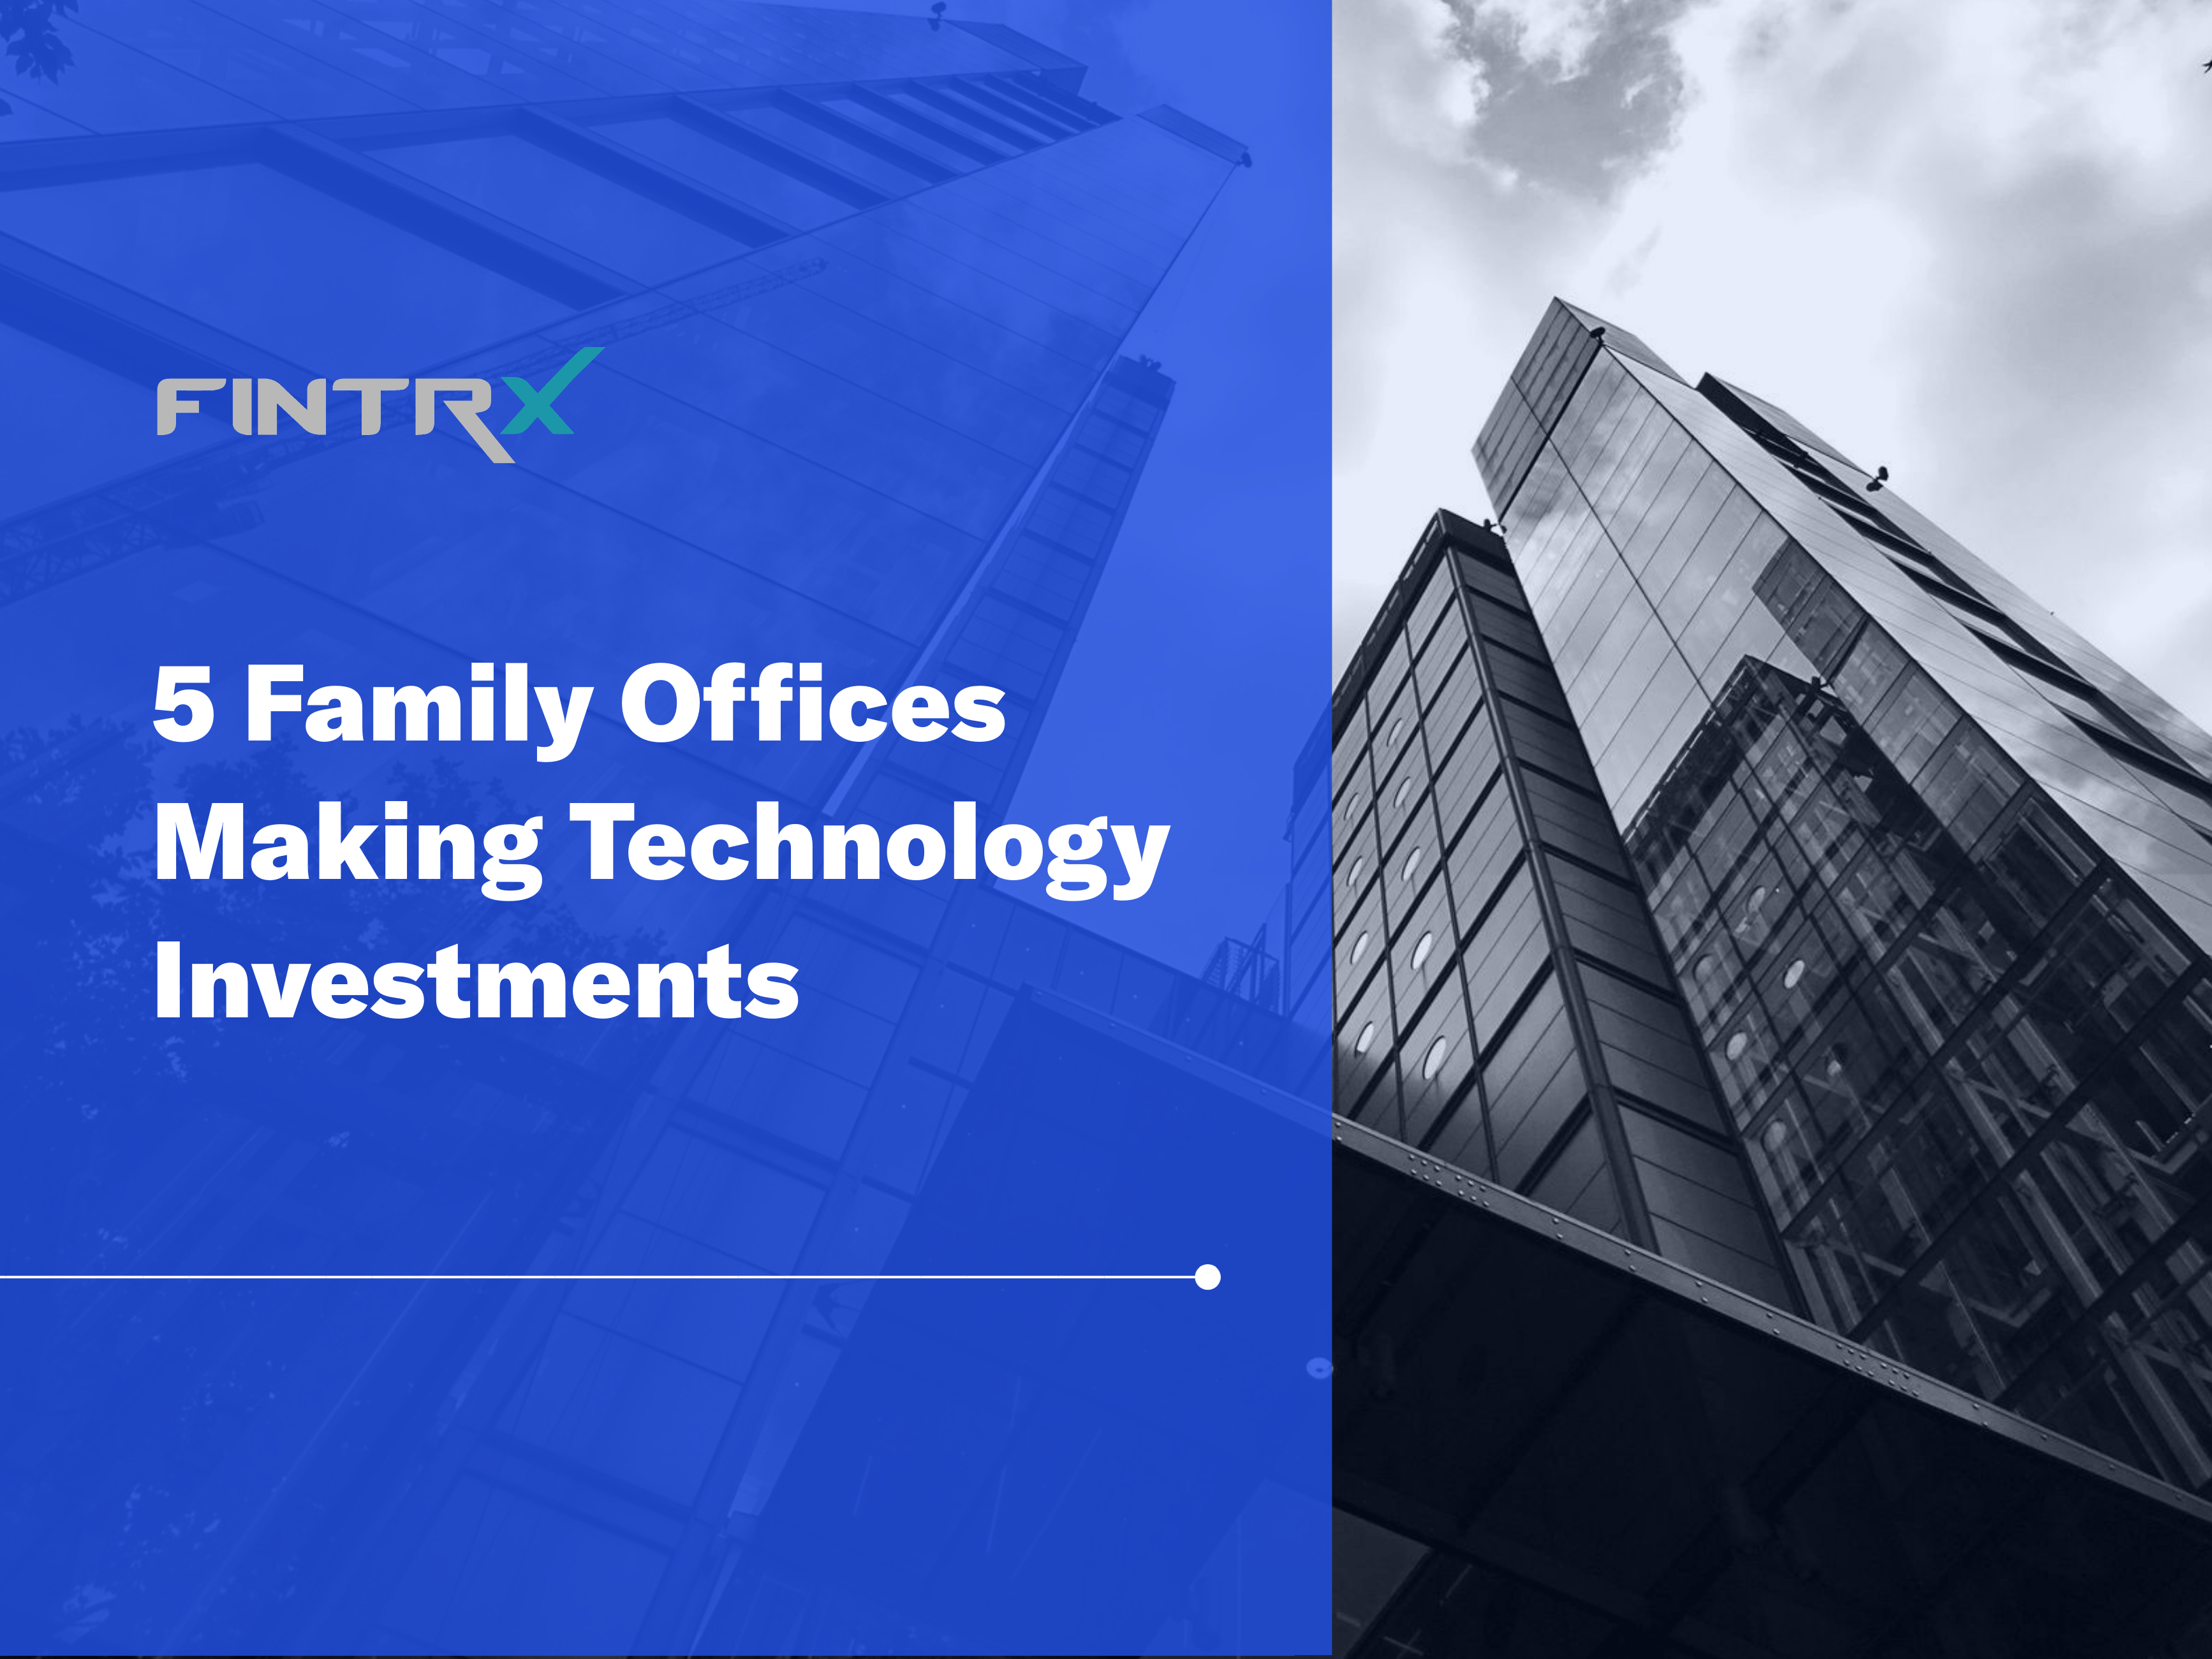 5 Family Offices Making Technology Investments